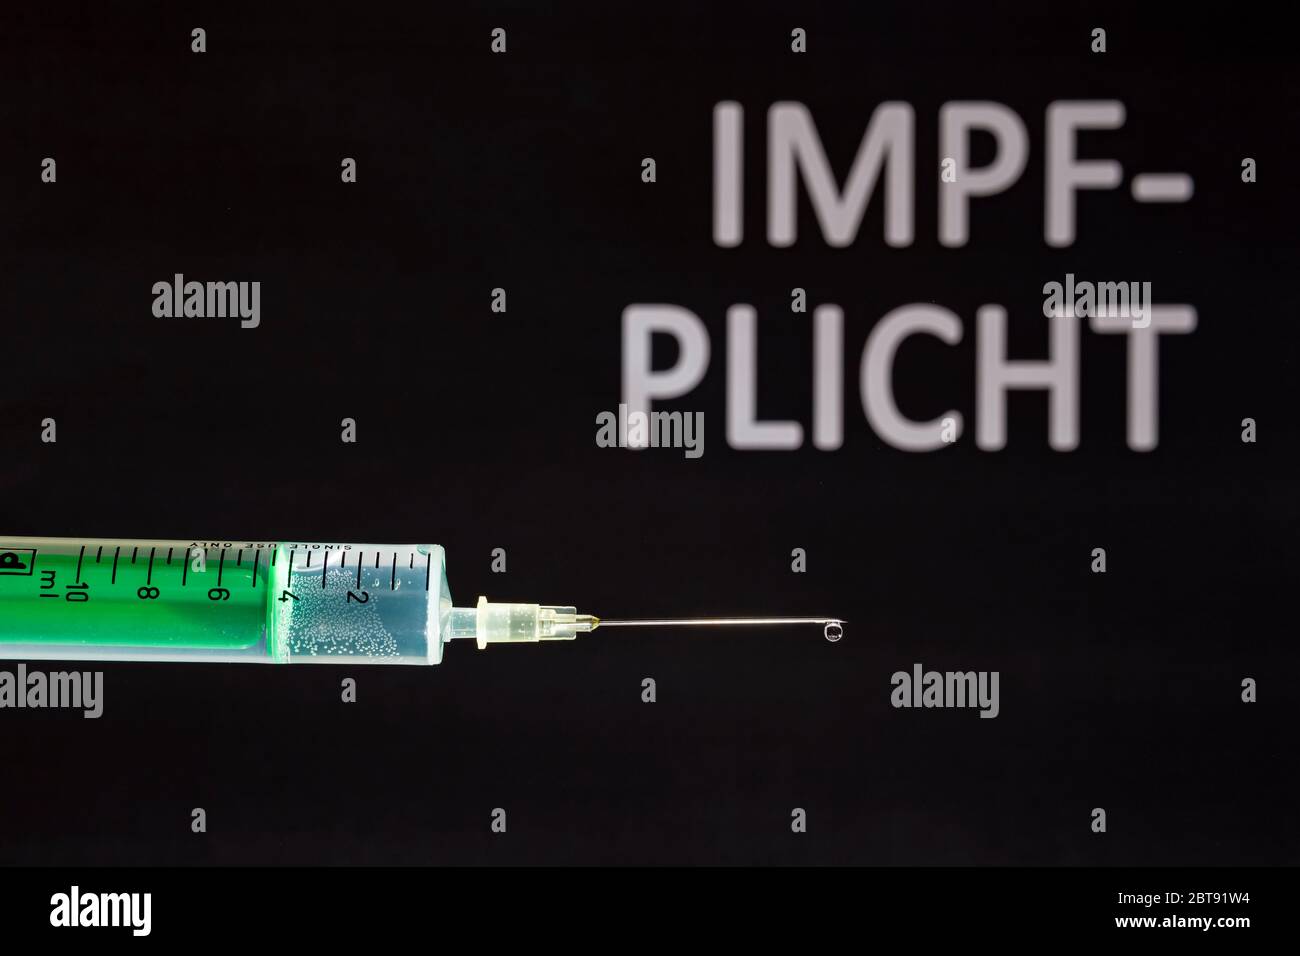 This photo illustration shows a disposable syringe with hypodermic needle, IMPFPLICHT written on a black board behind Stock Photo